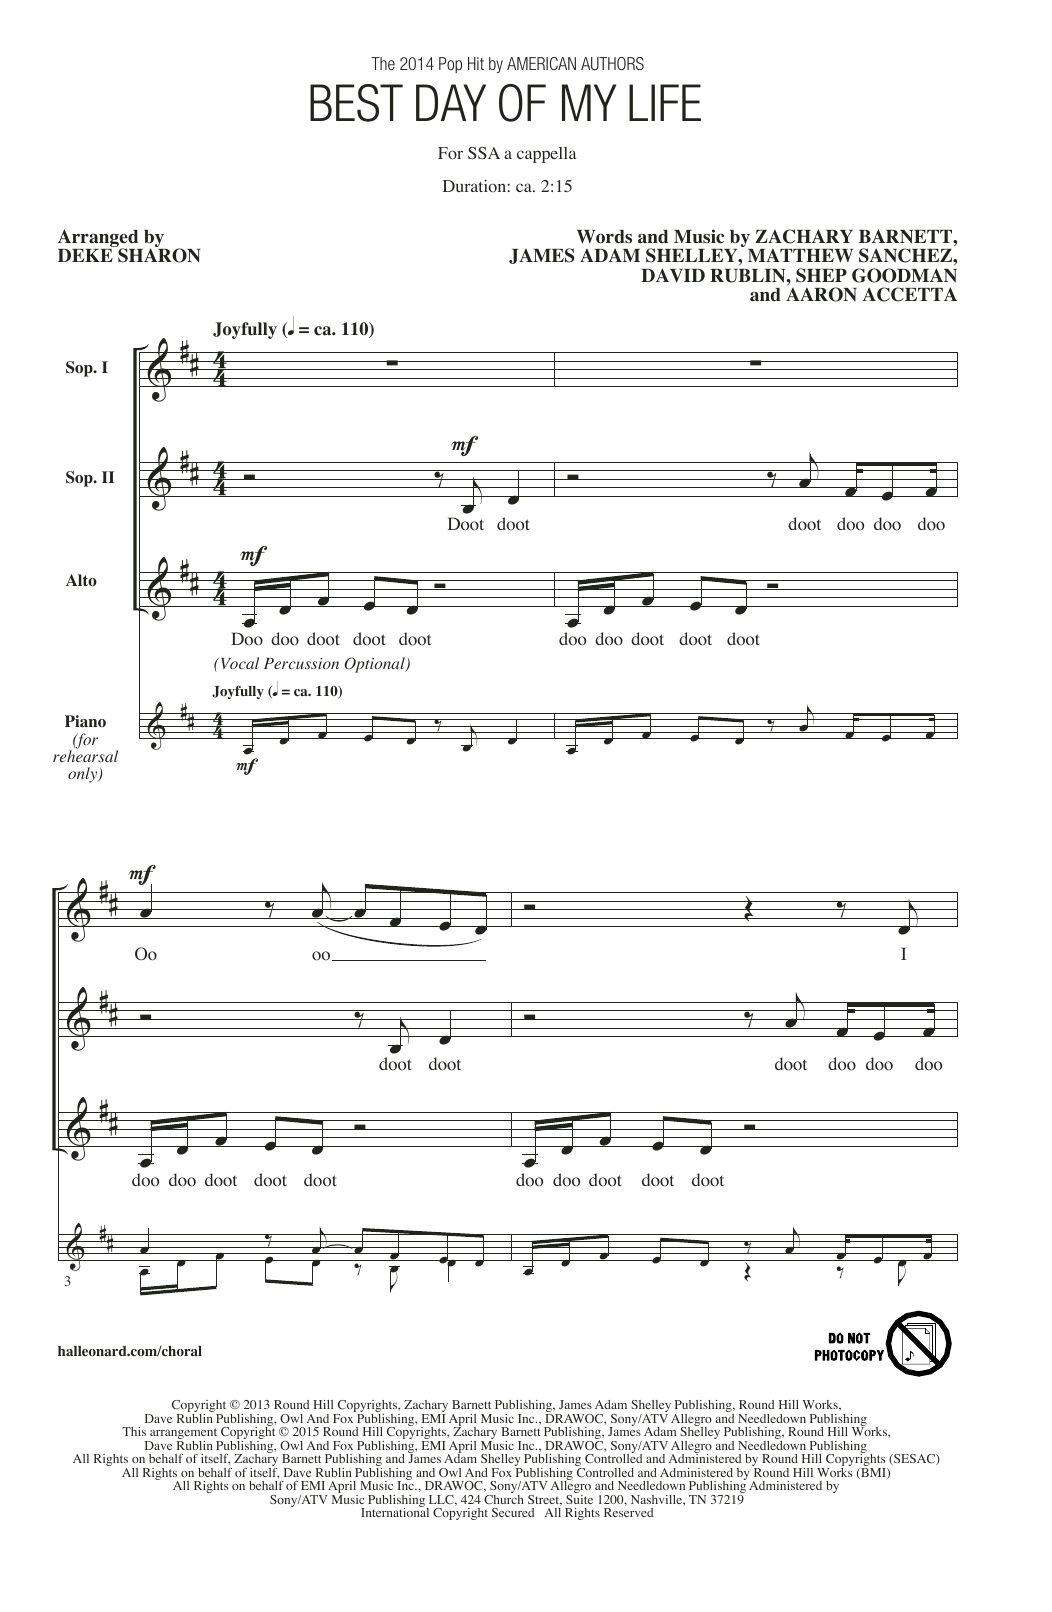 Download American Authors Best Day Of My Life (arr. Deke Sharon) Sheet Music